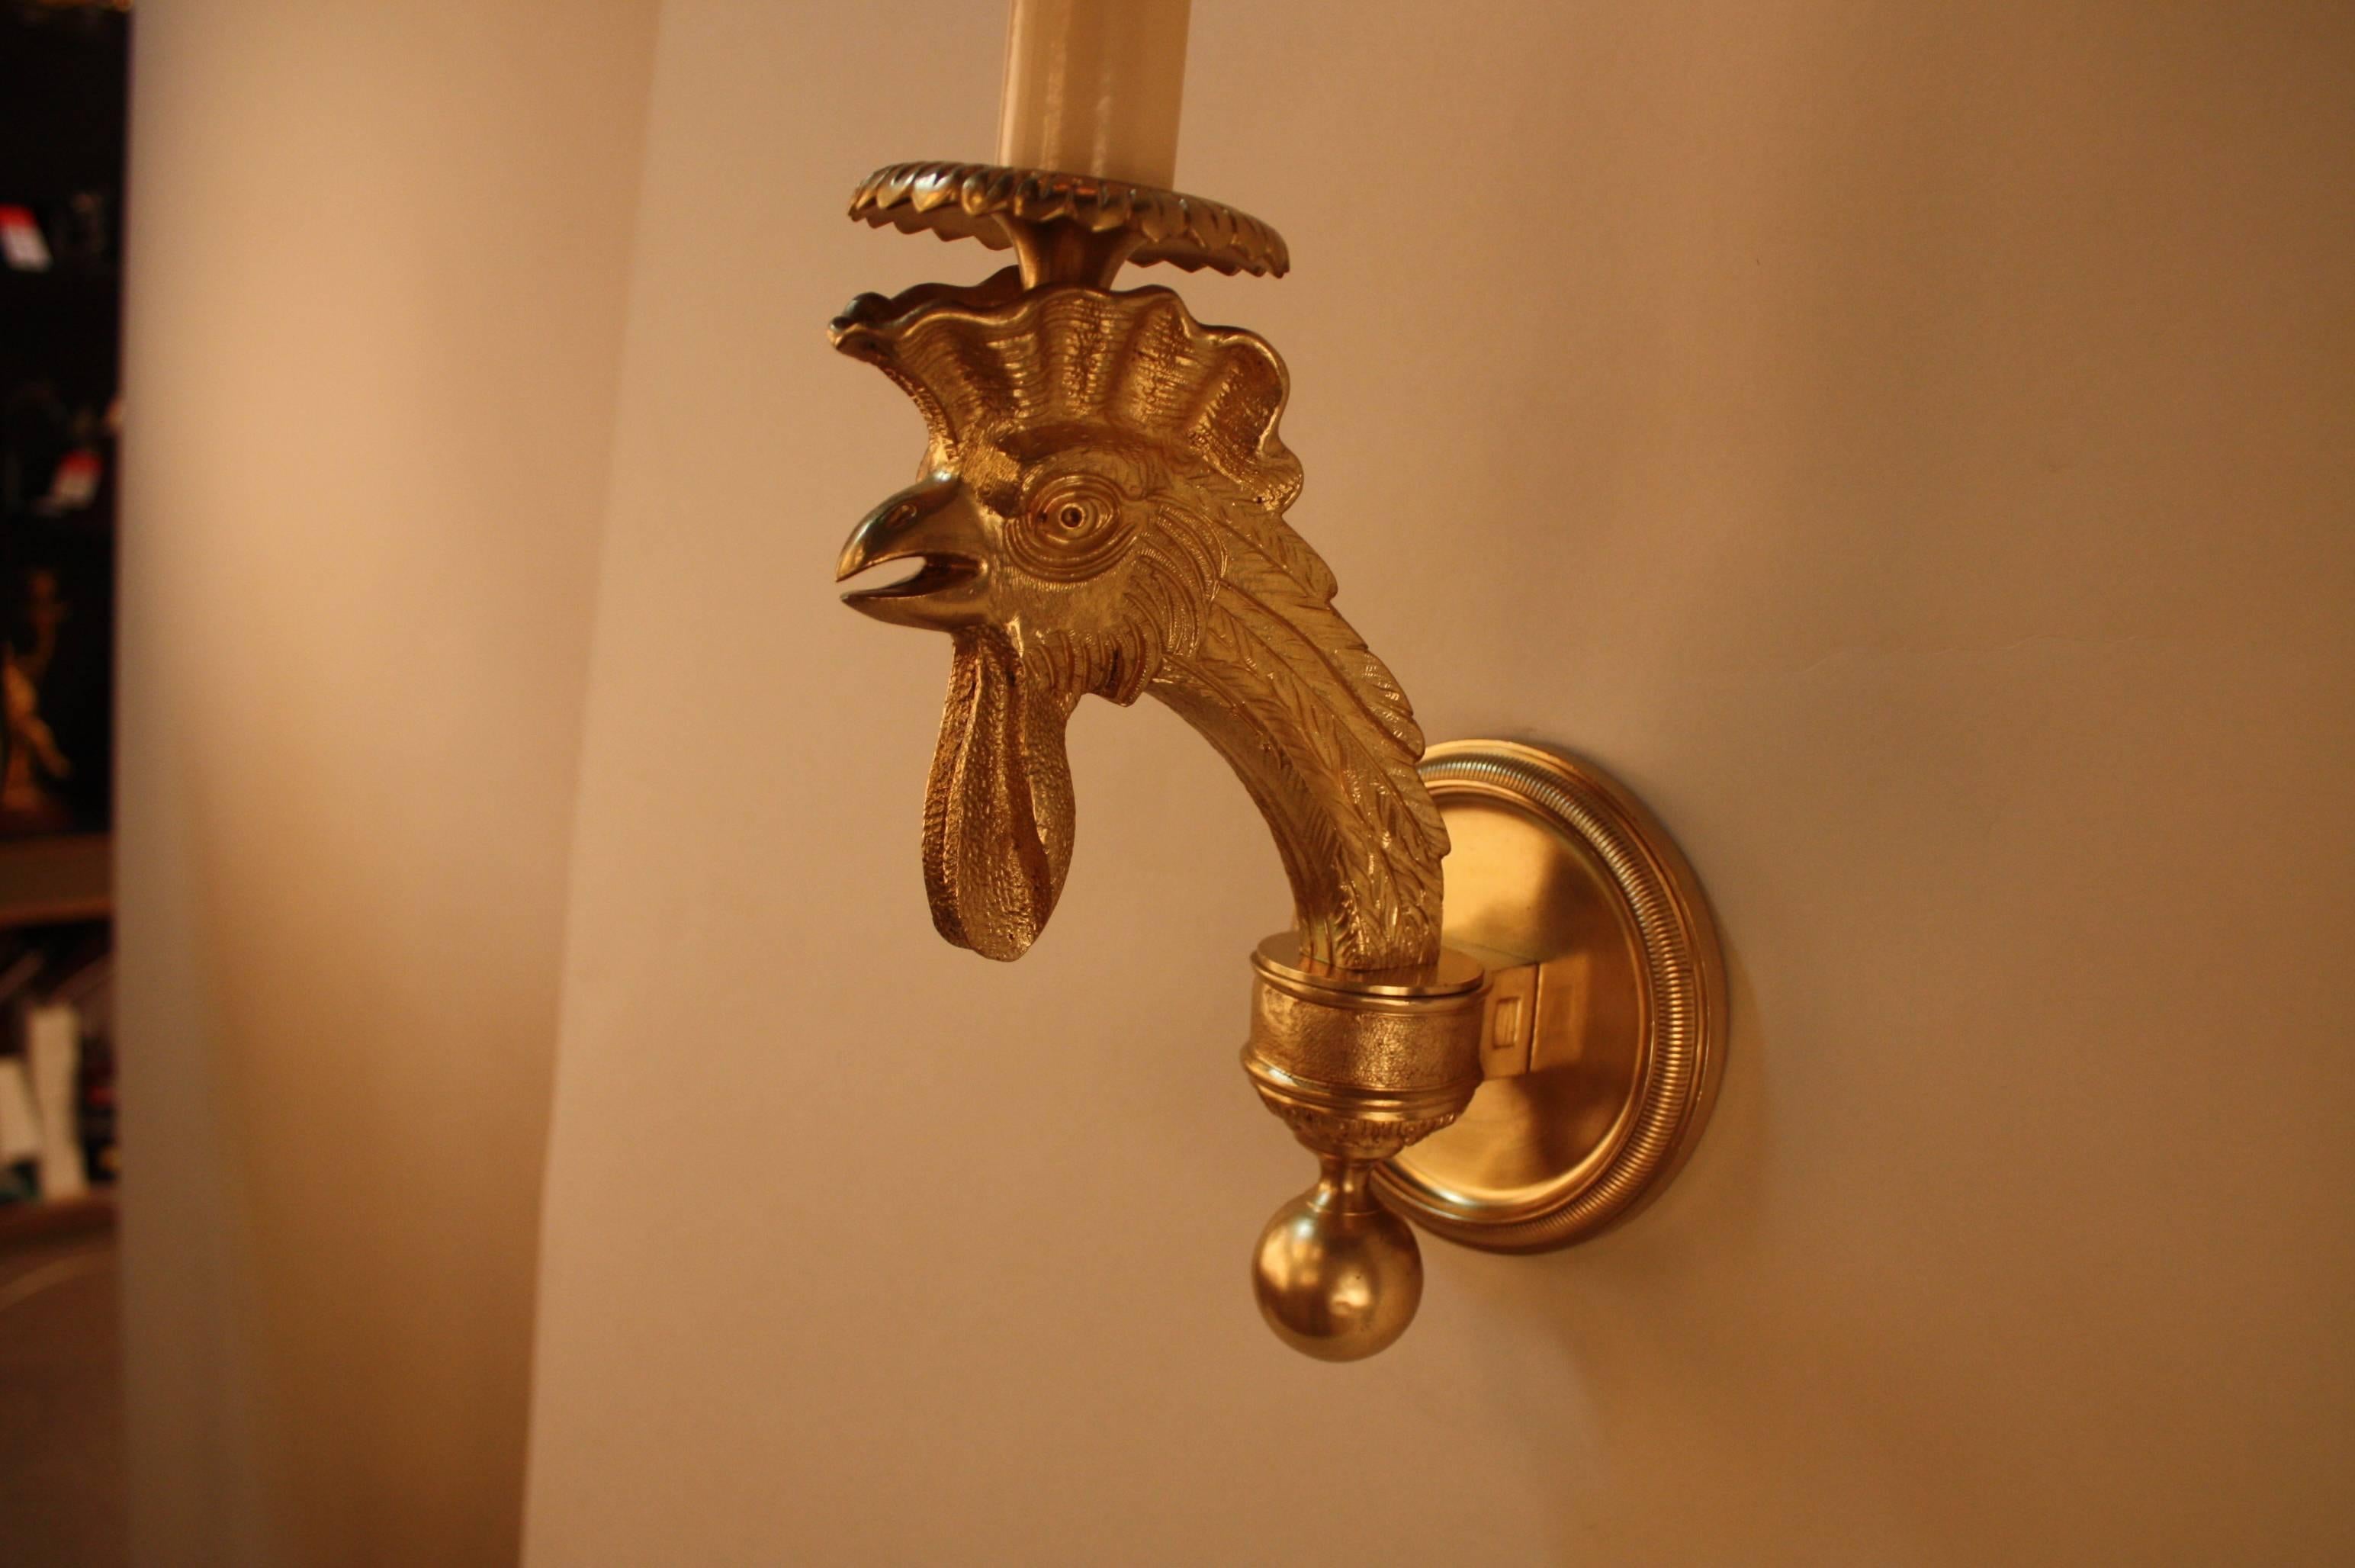 Fabulous pair of single light wall sconces with beautiful bronze sculptured rooster head arm.